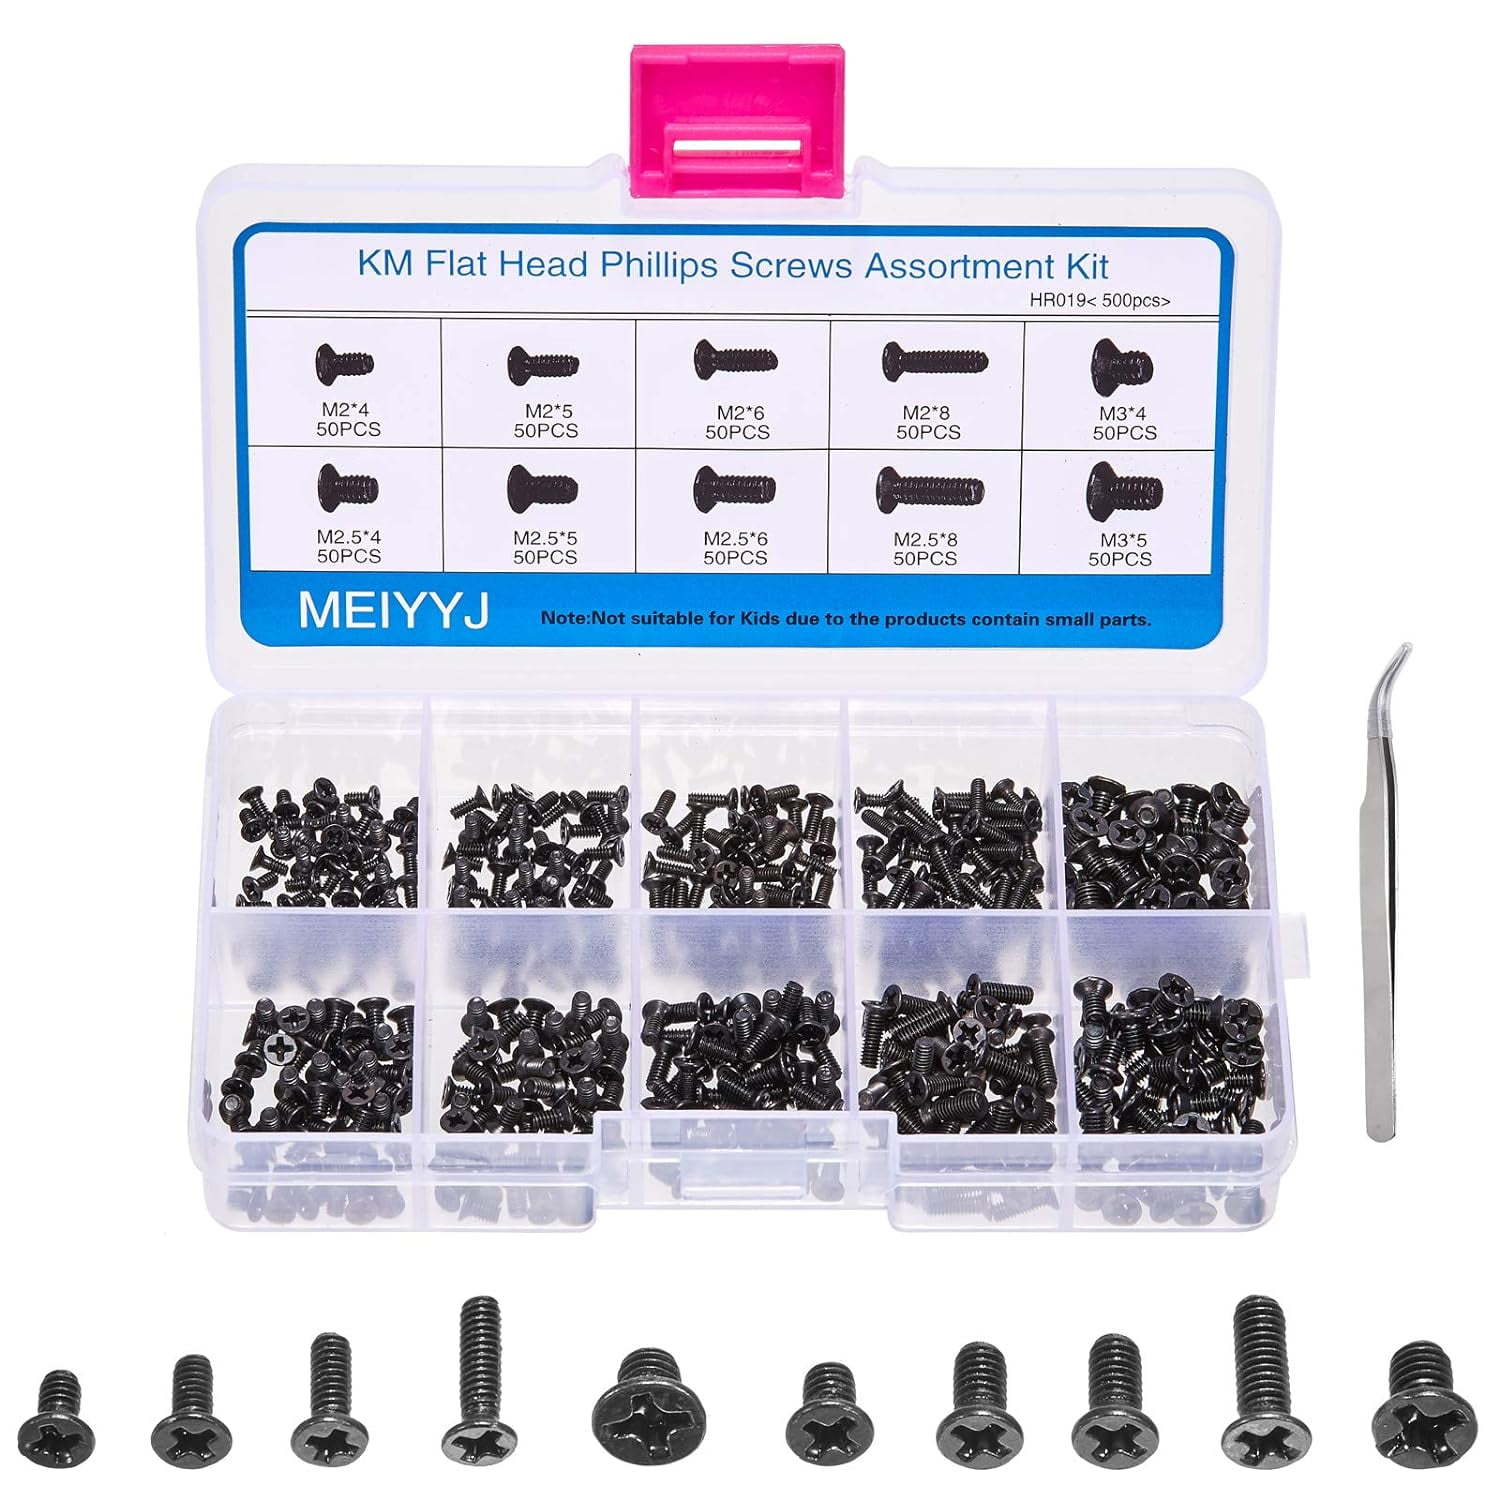 MEIYYJ 500pcs M2 M2.5 M3 Laptop Notebook Computer Replacement Screws Kit,  PC Flat Head Phillips Screw Assortments, Countersunk SSD Electronic Repair  Accessories for DELL Samsung IBM HP Toshiba Black 